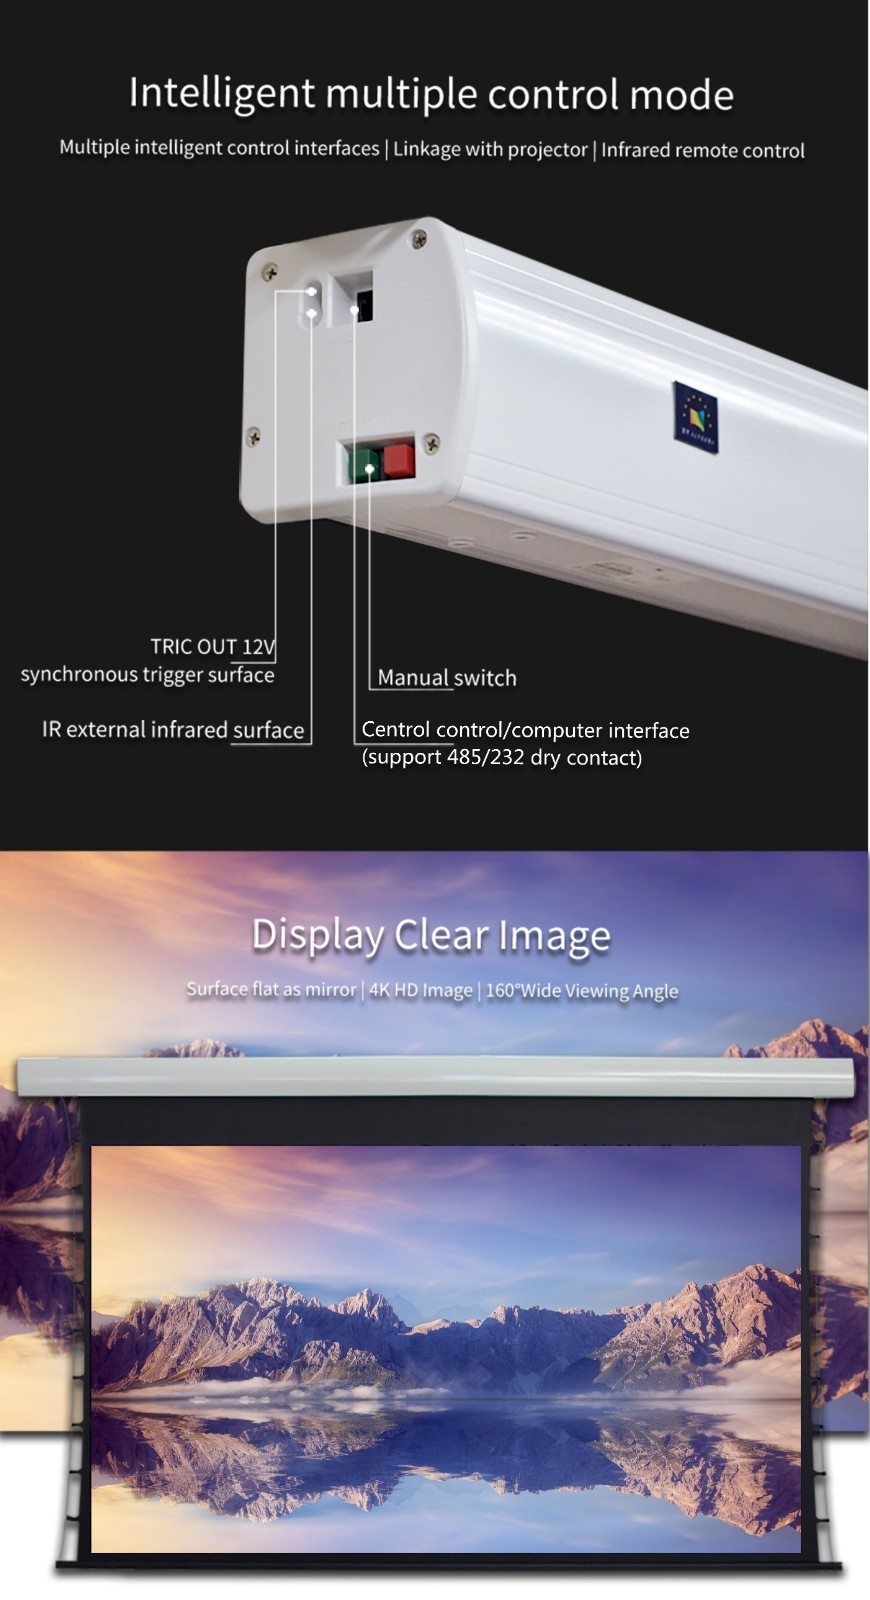 inceiling fixed projector screen design for living room